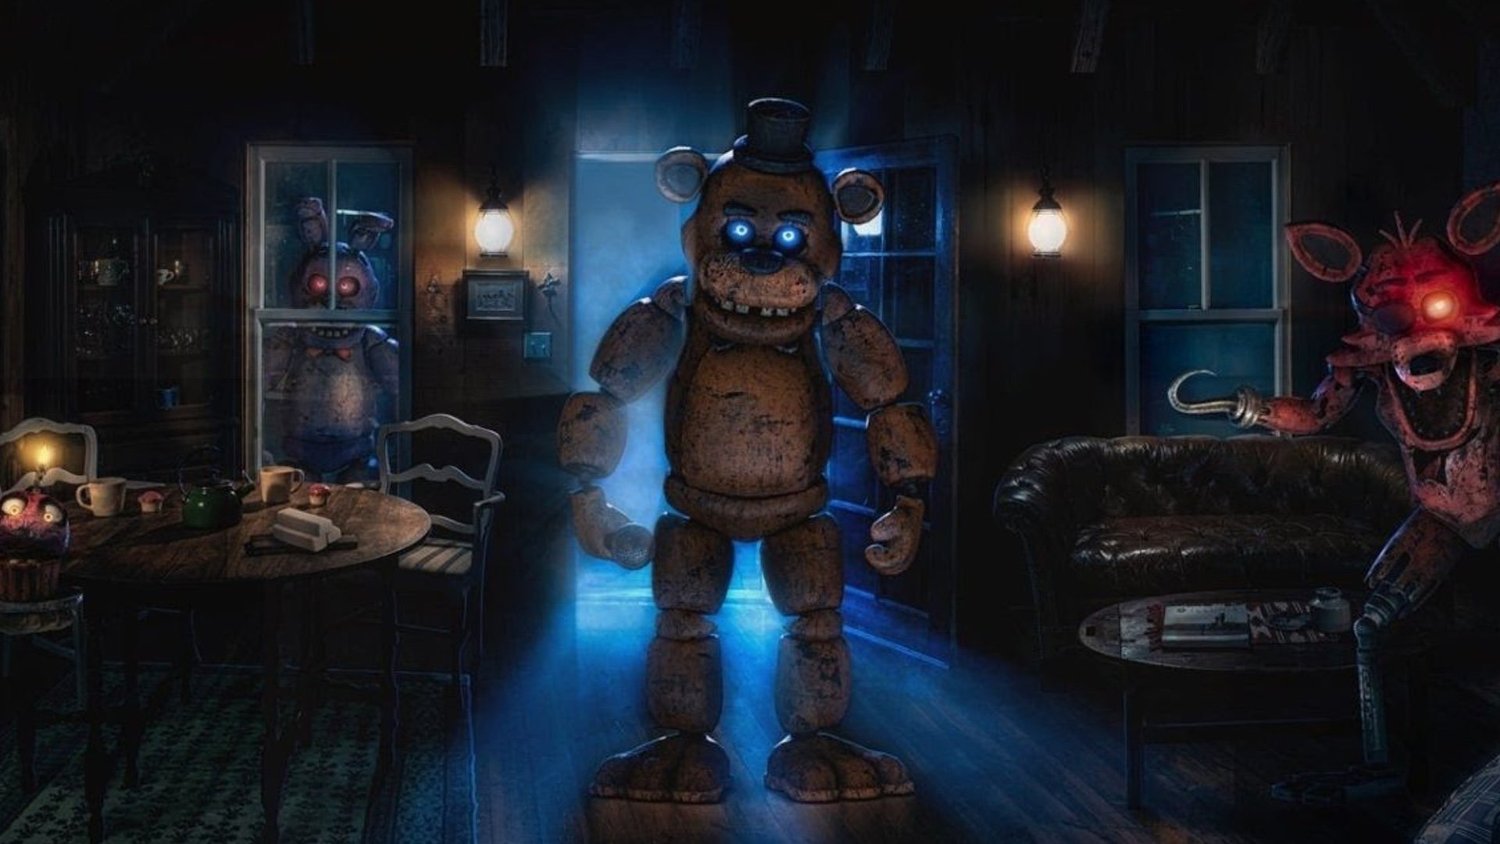 Five Nights at Freddy's movie coming to theaters, Peacock